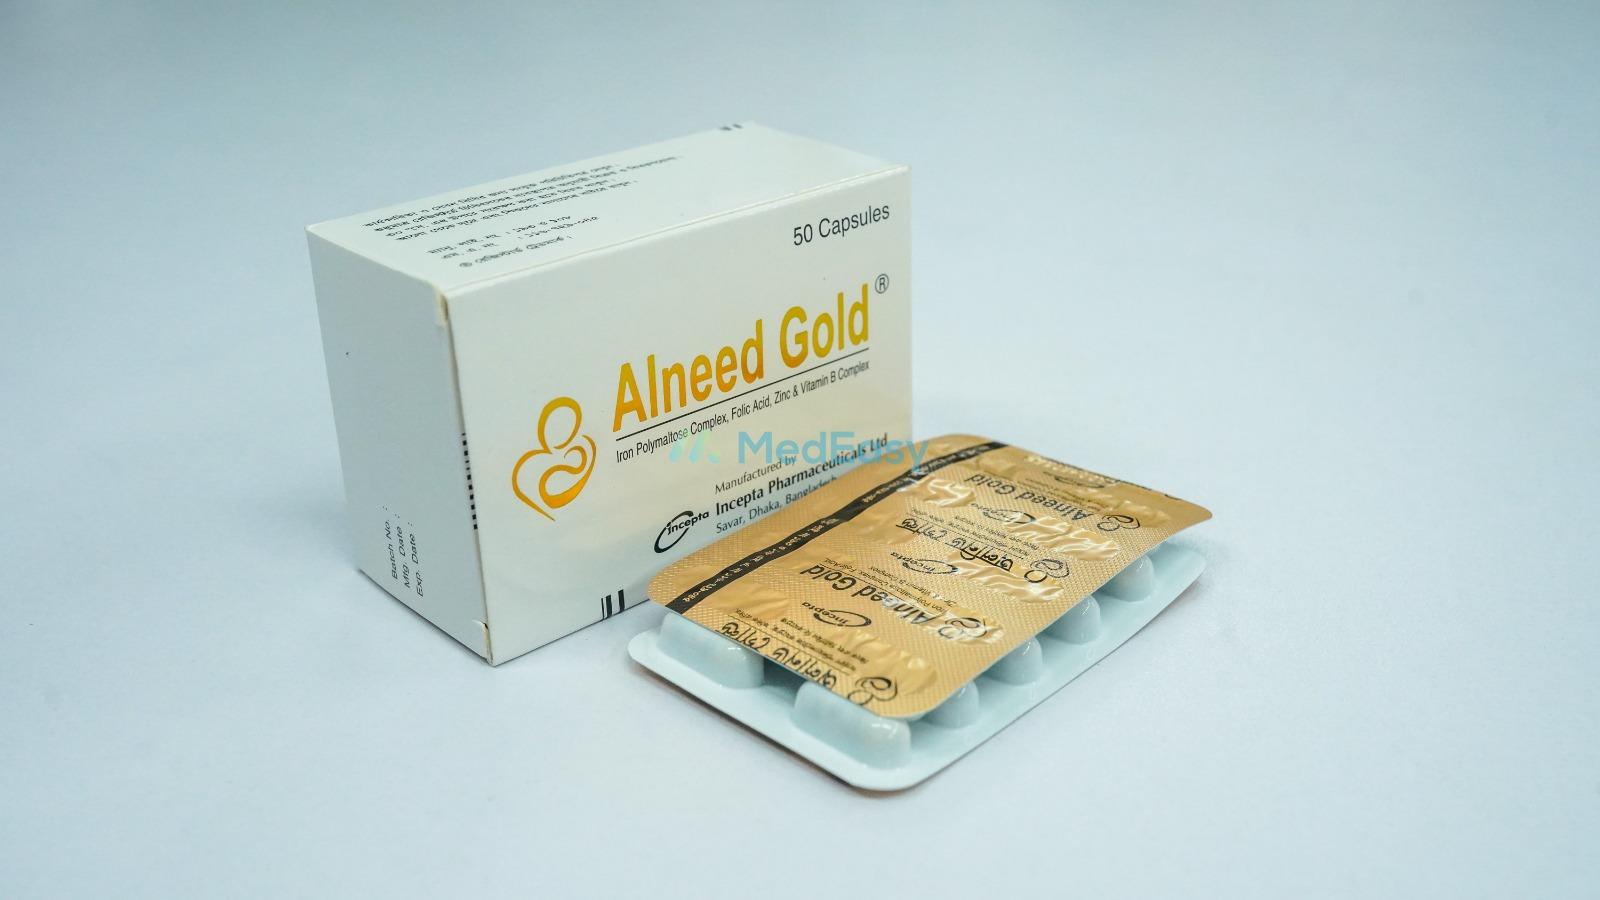 Alneed Gold